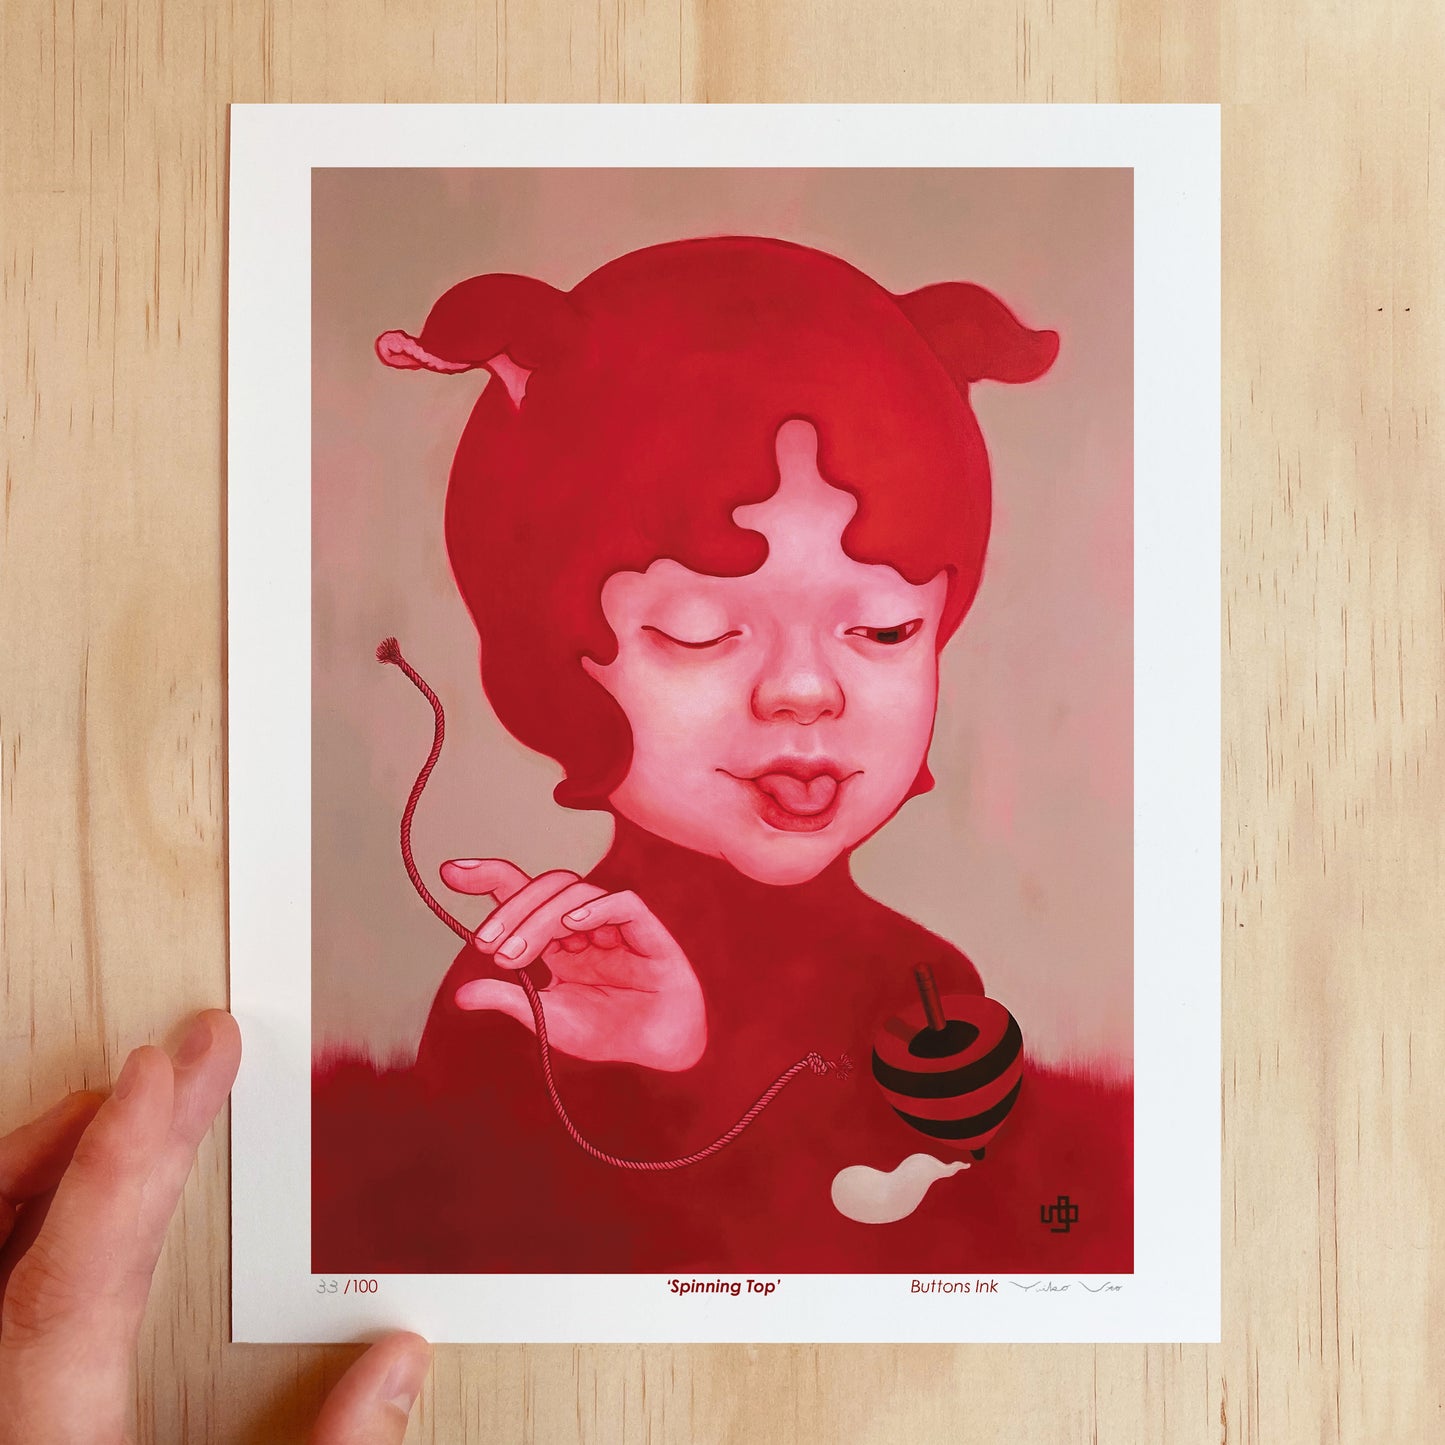 Art Print ‘Spinning Top’ (Limited print of 100)